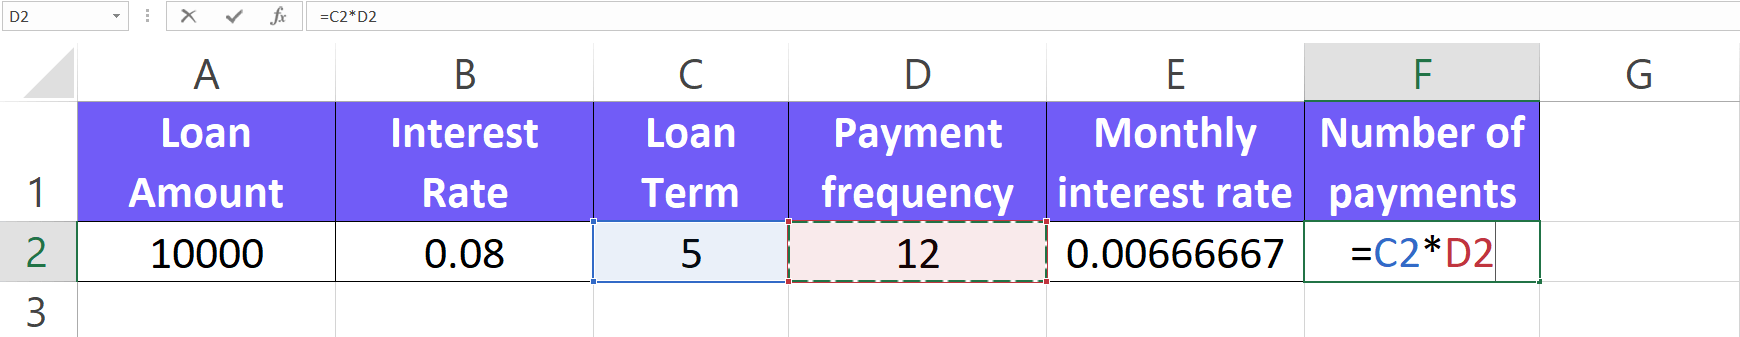 Formula to calculate number of payments for business loan screenshot from excel